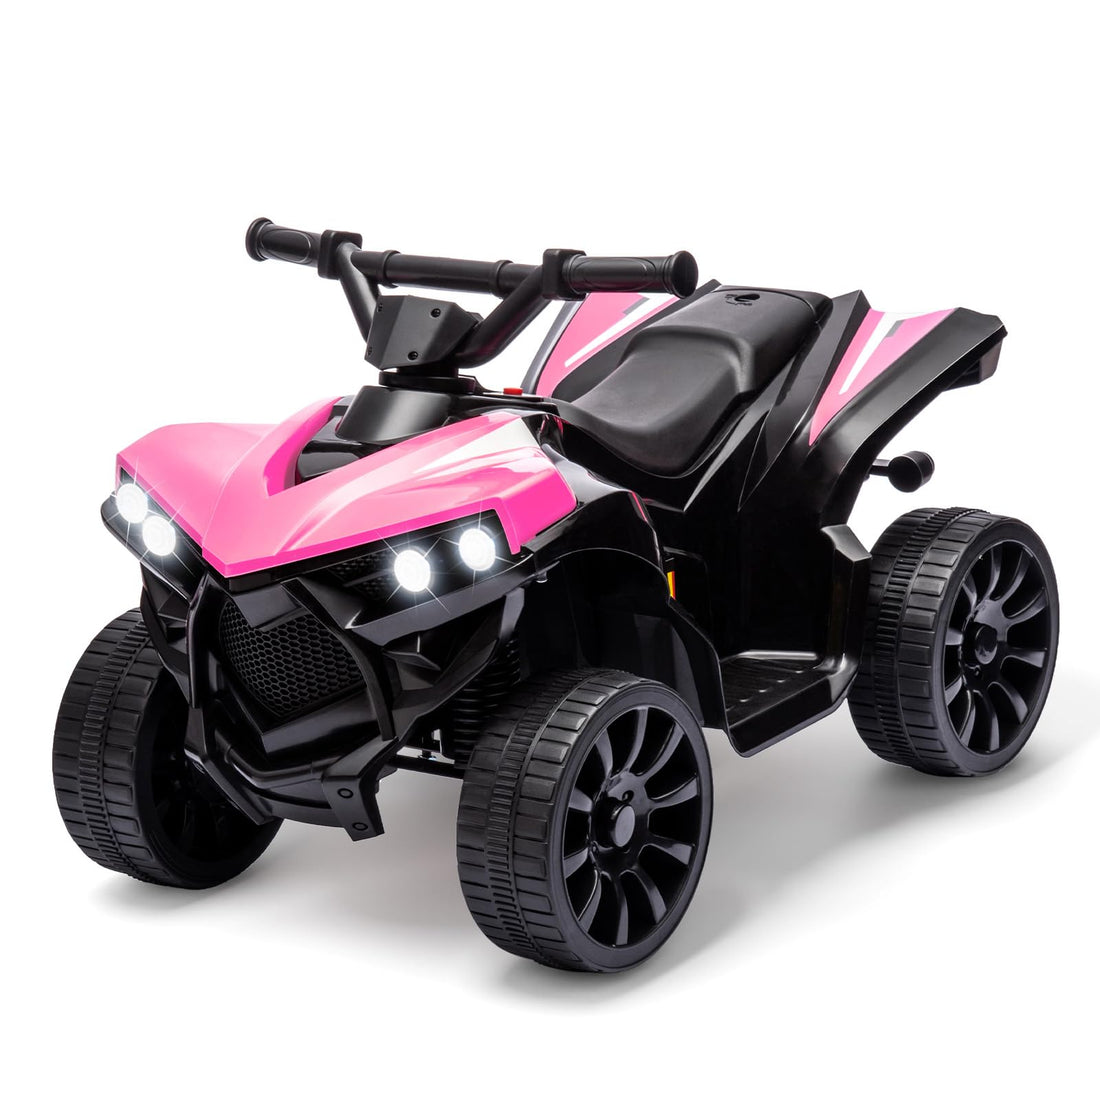 Kids ATV 4 Wheeler, 6V Battery Powered Quad Electric Vehicle with LED Light, Music, Foot Pedal & Wear-Resistant Wheels, Ride on Toy Car for Kids Toddler 2.5-6 Years Old